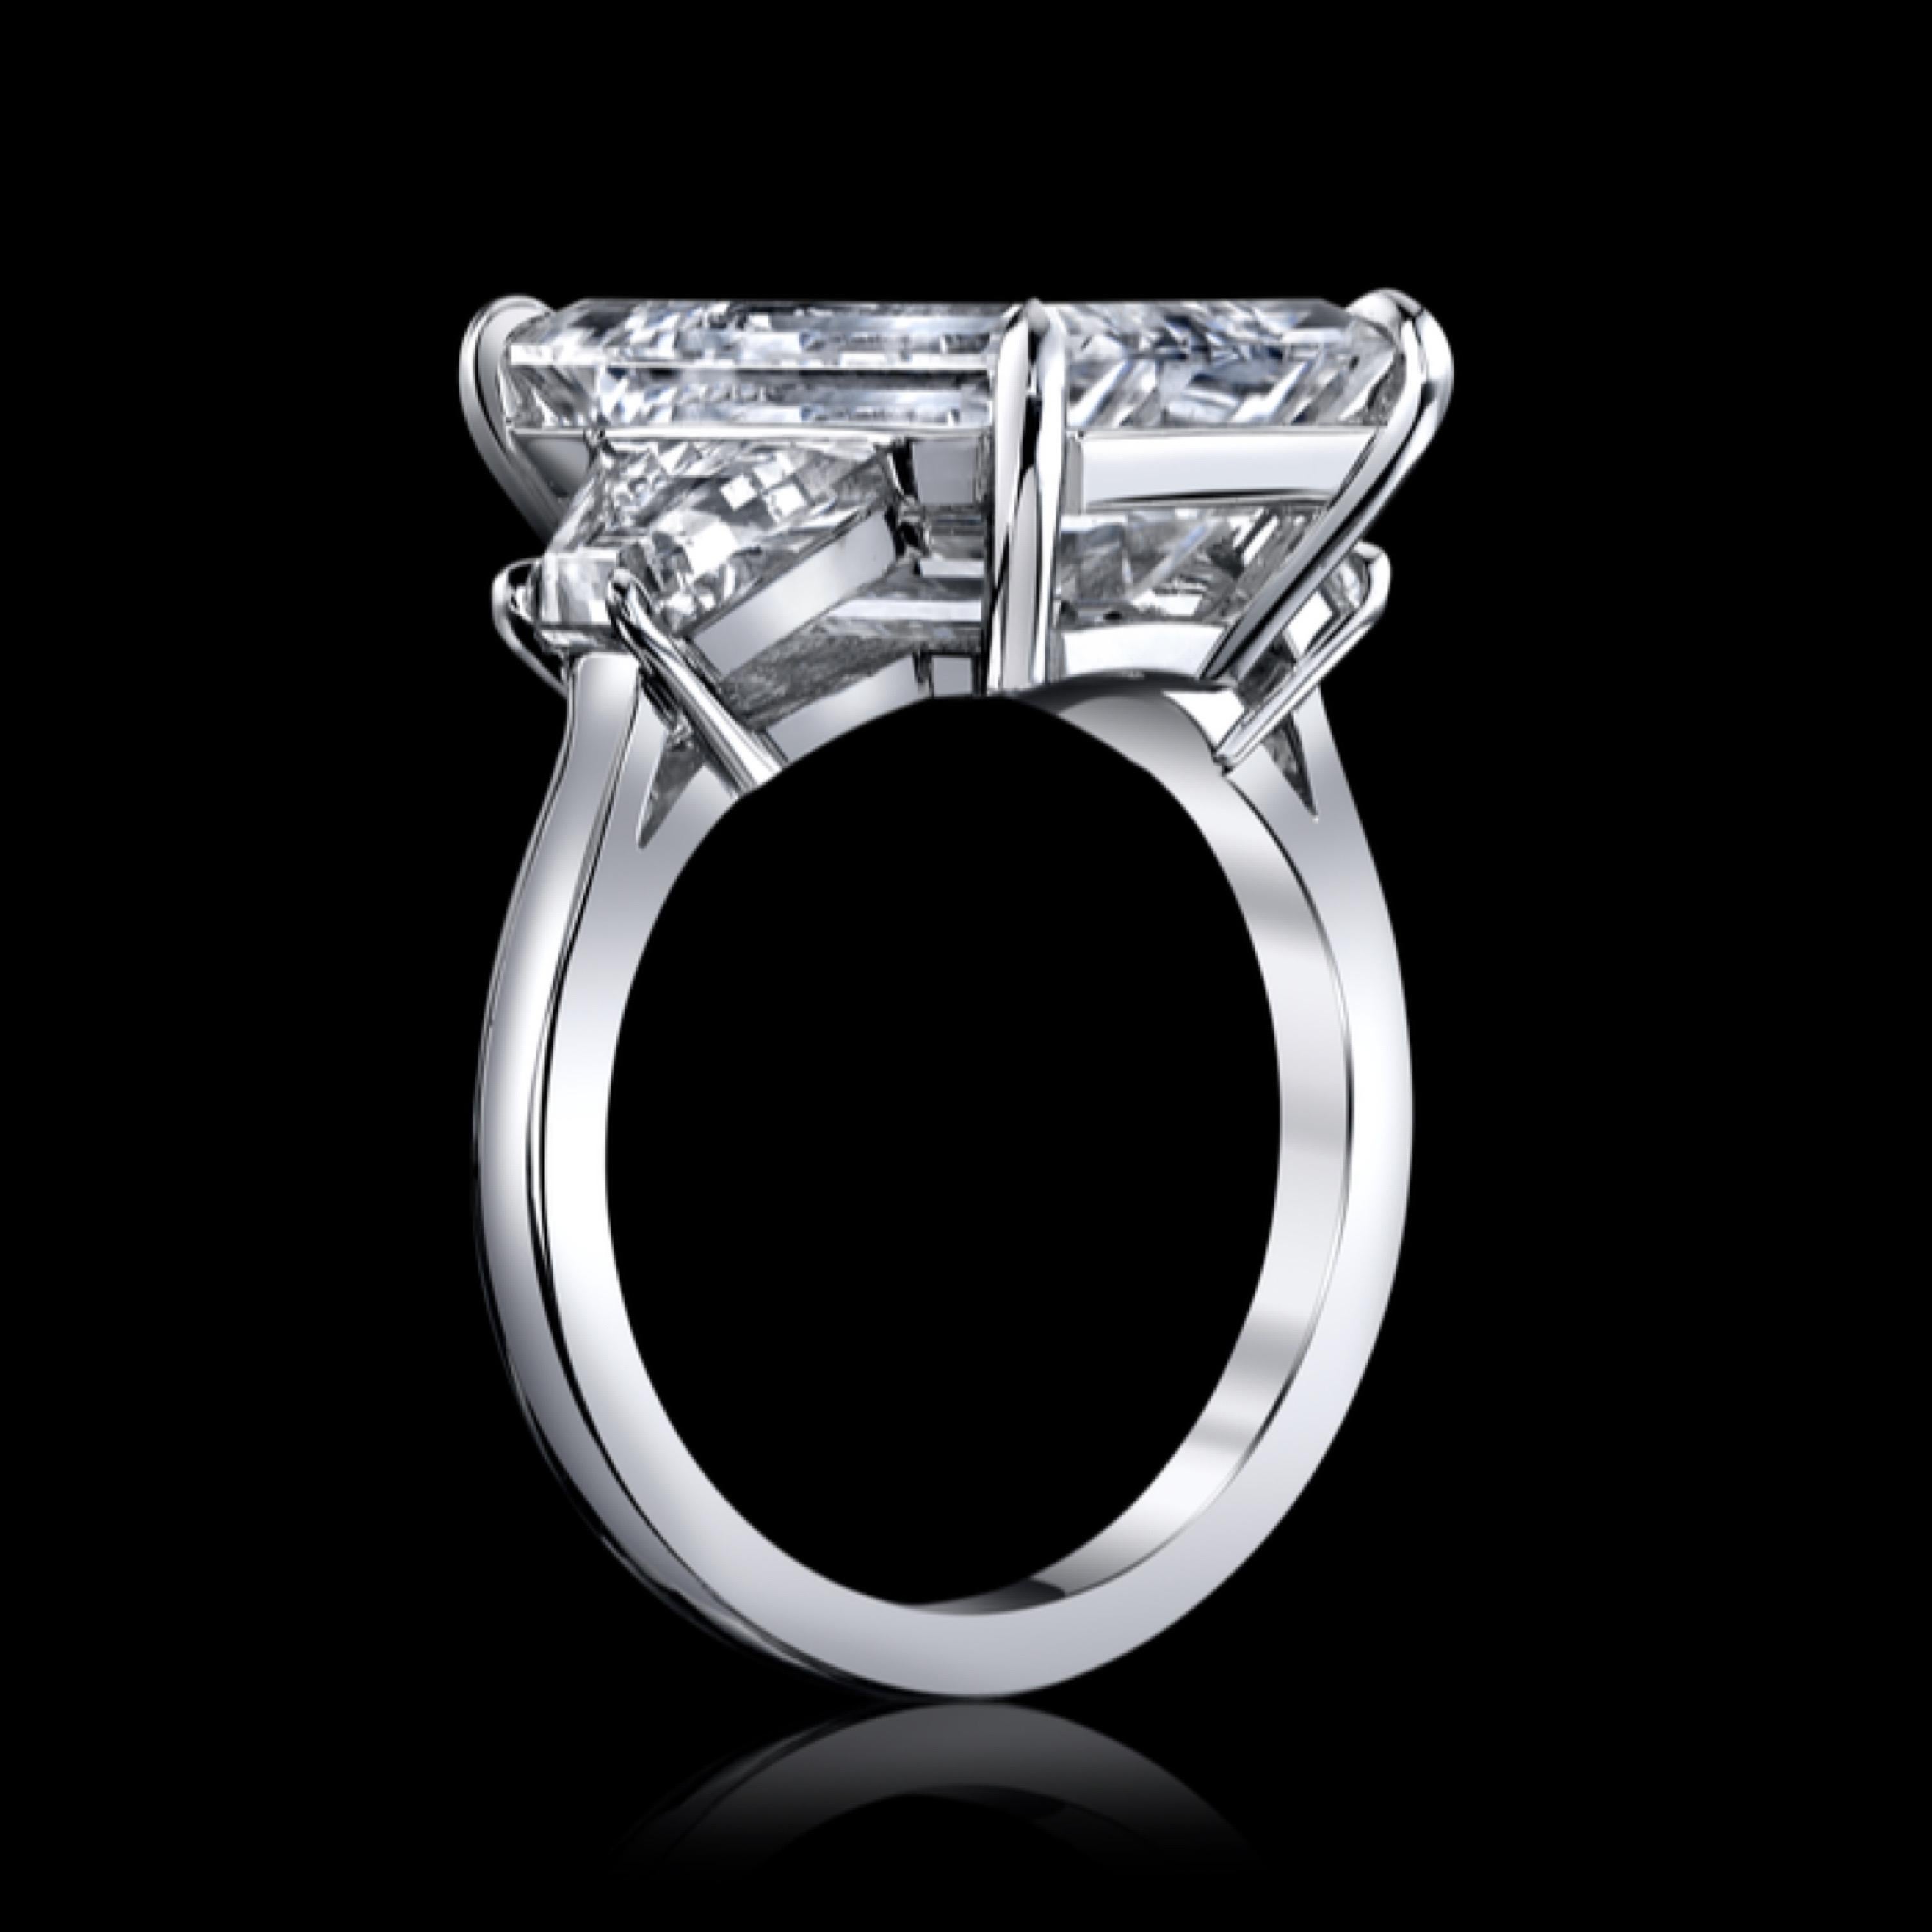 Emerald Cut Emilio Jewelry GIA Certified 9.00 Carat Colorless Diamond Ring For Sale